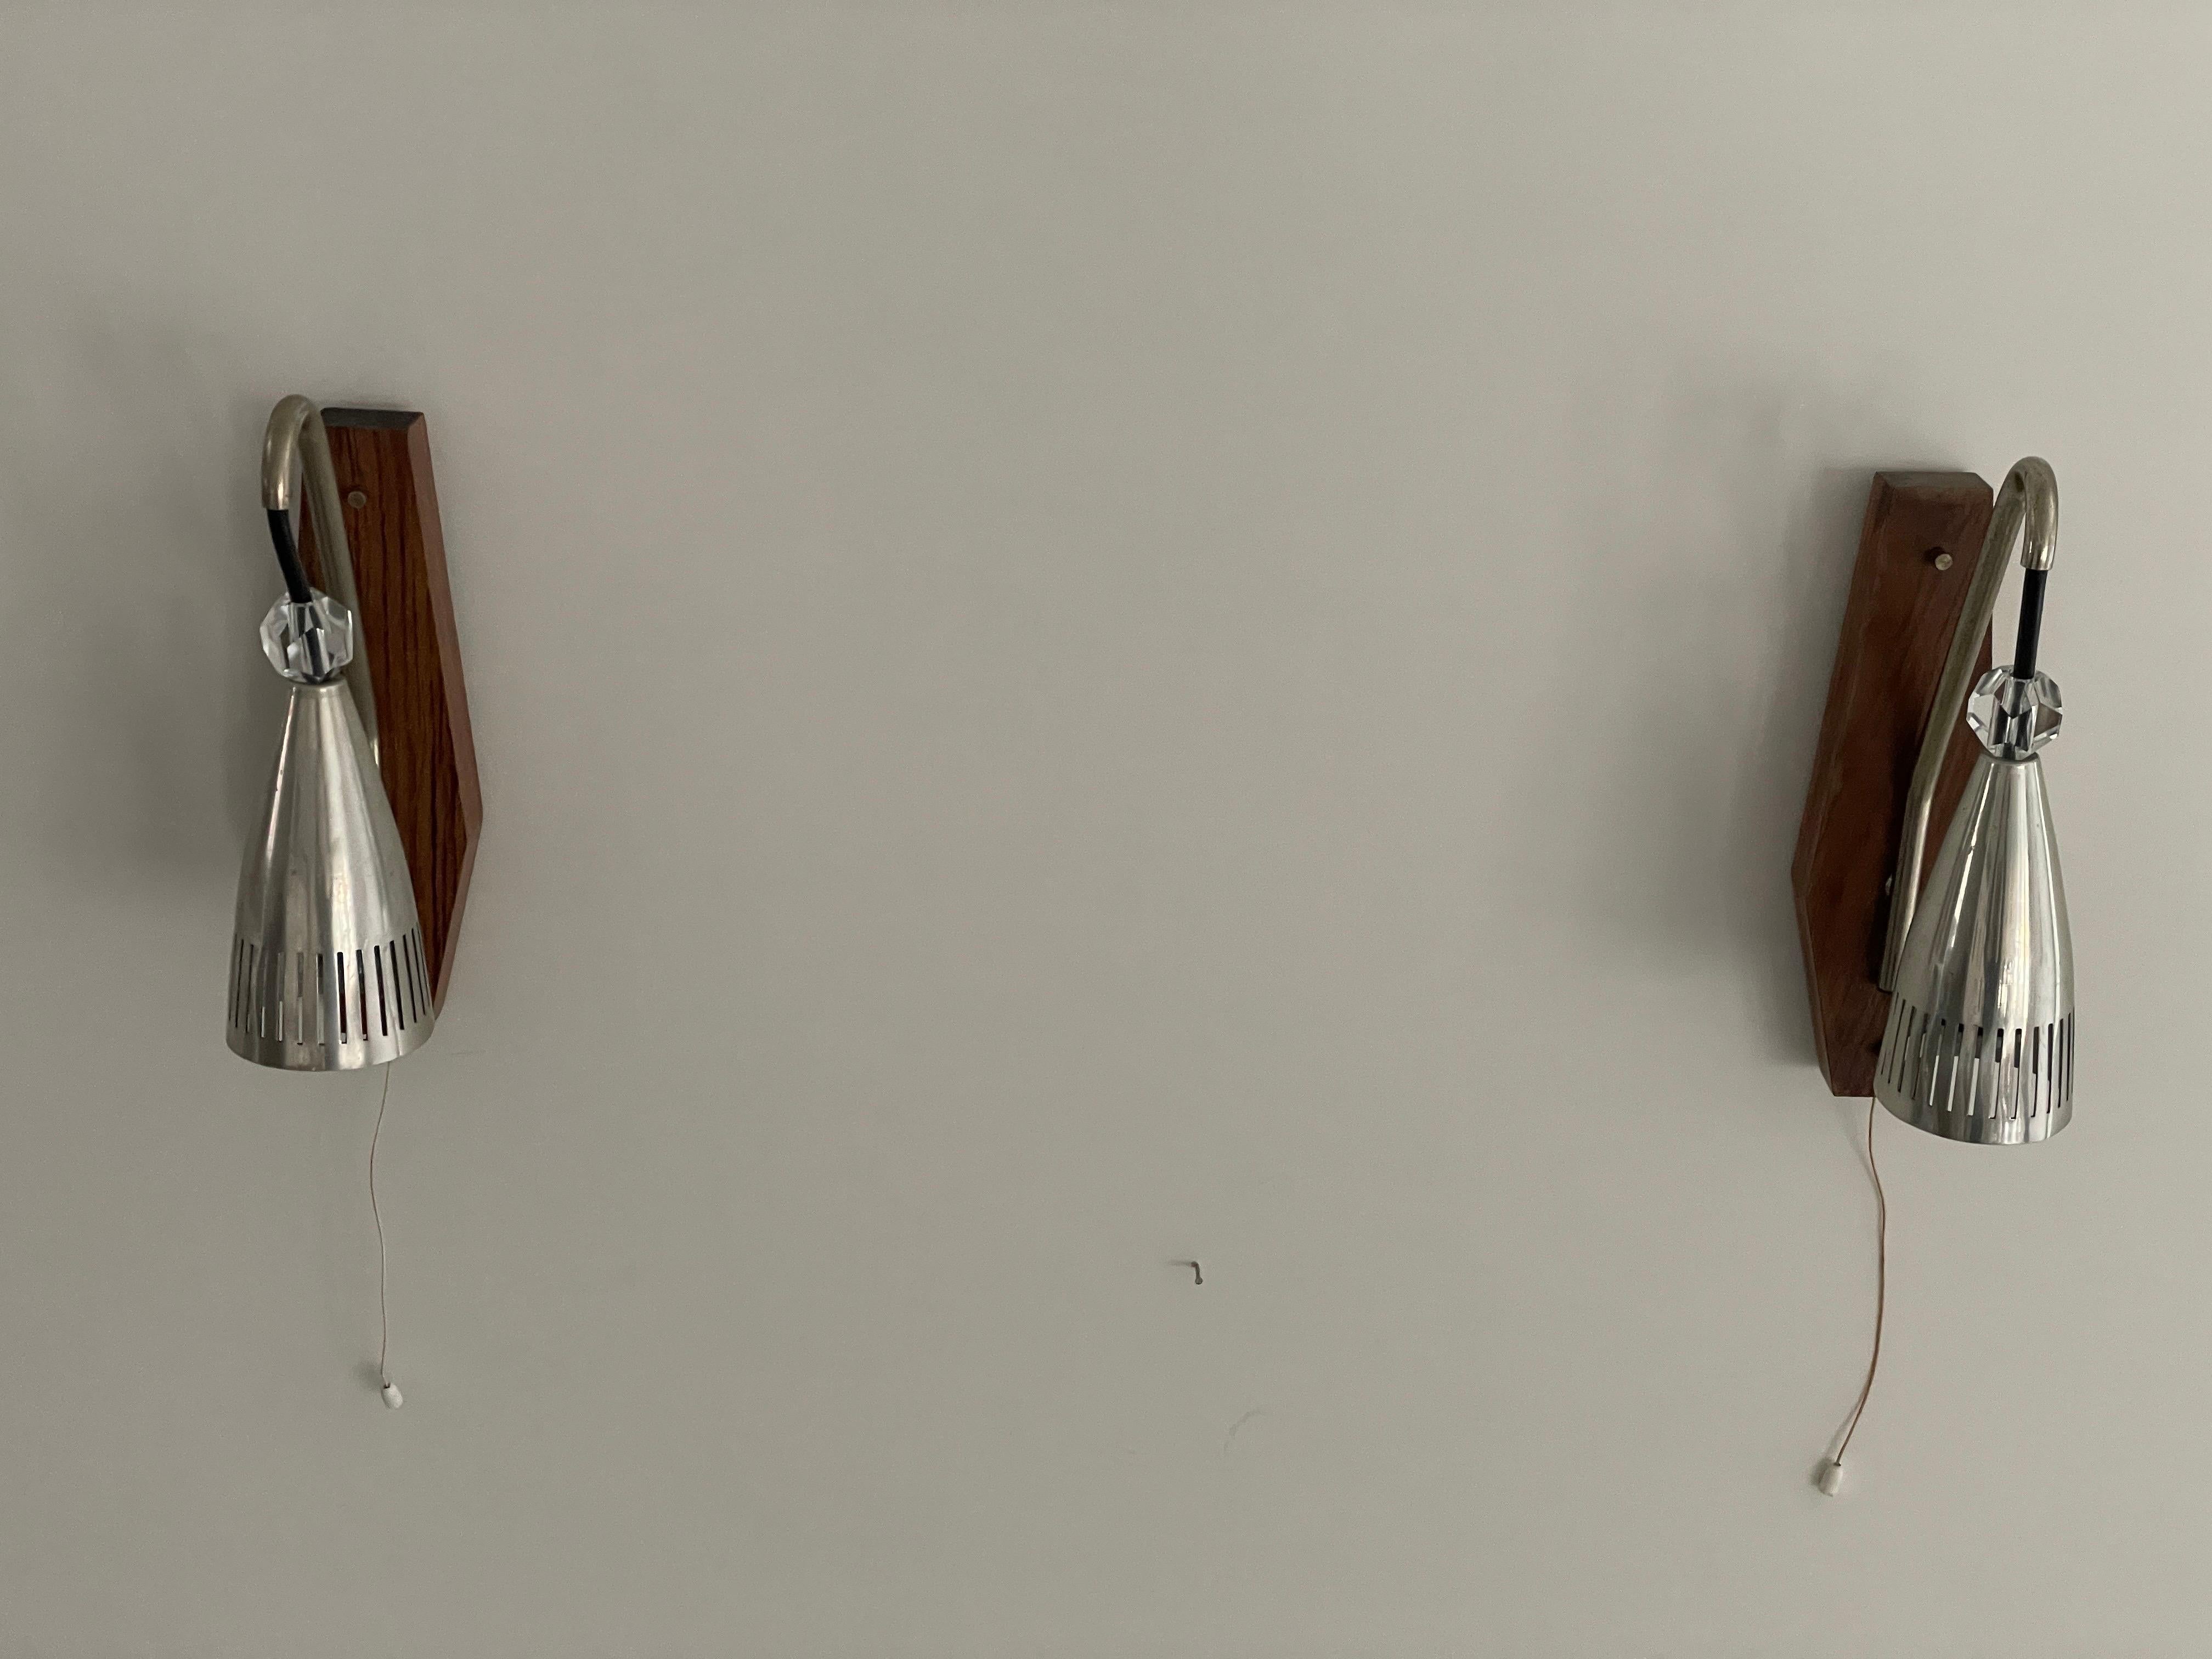 Grey Shade Danish Sconces with Wood Base, 1960s, Denmark

Lamps are in very good condition.

These lamps works with E14 standard light bulbs. 
Wired and suitable to use in all countries. (110-220 V)

Dimensions:
Height: 26 cm
Width: 16 cm
Depth: 7 cm